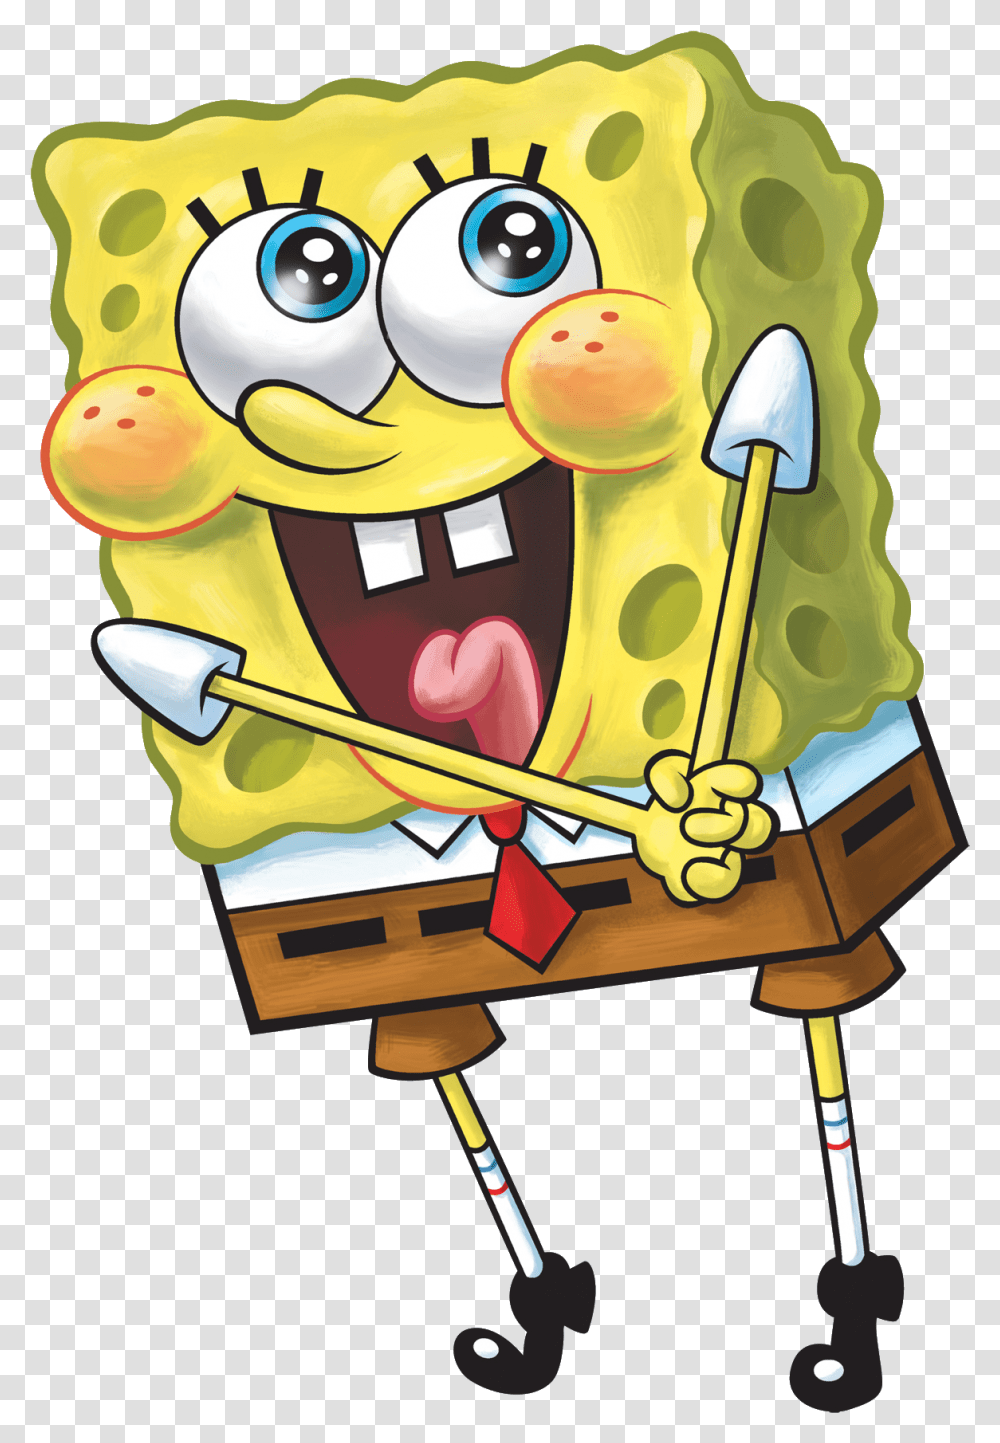 Animation Images All Sponge Bob Square Pants, Toy, Outdoors, Musical Instrument, Furniture Transparent Png